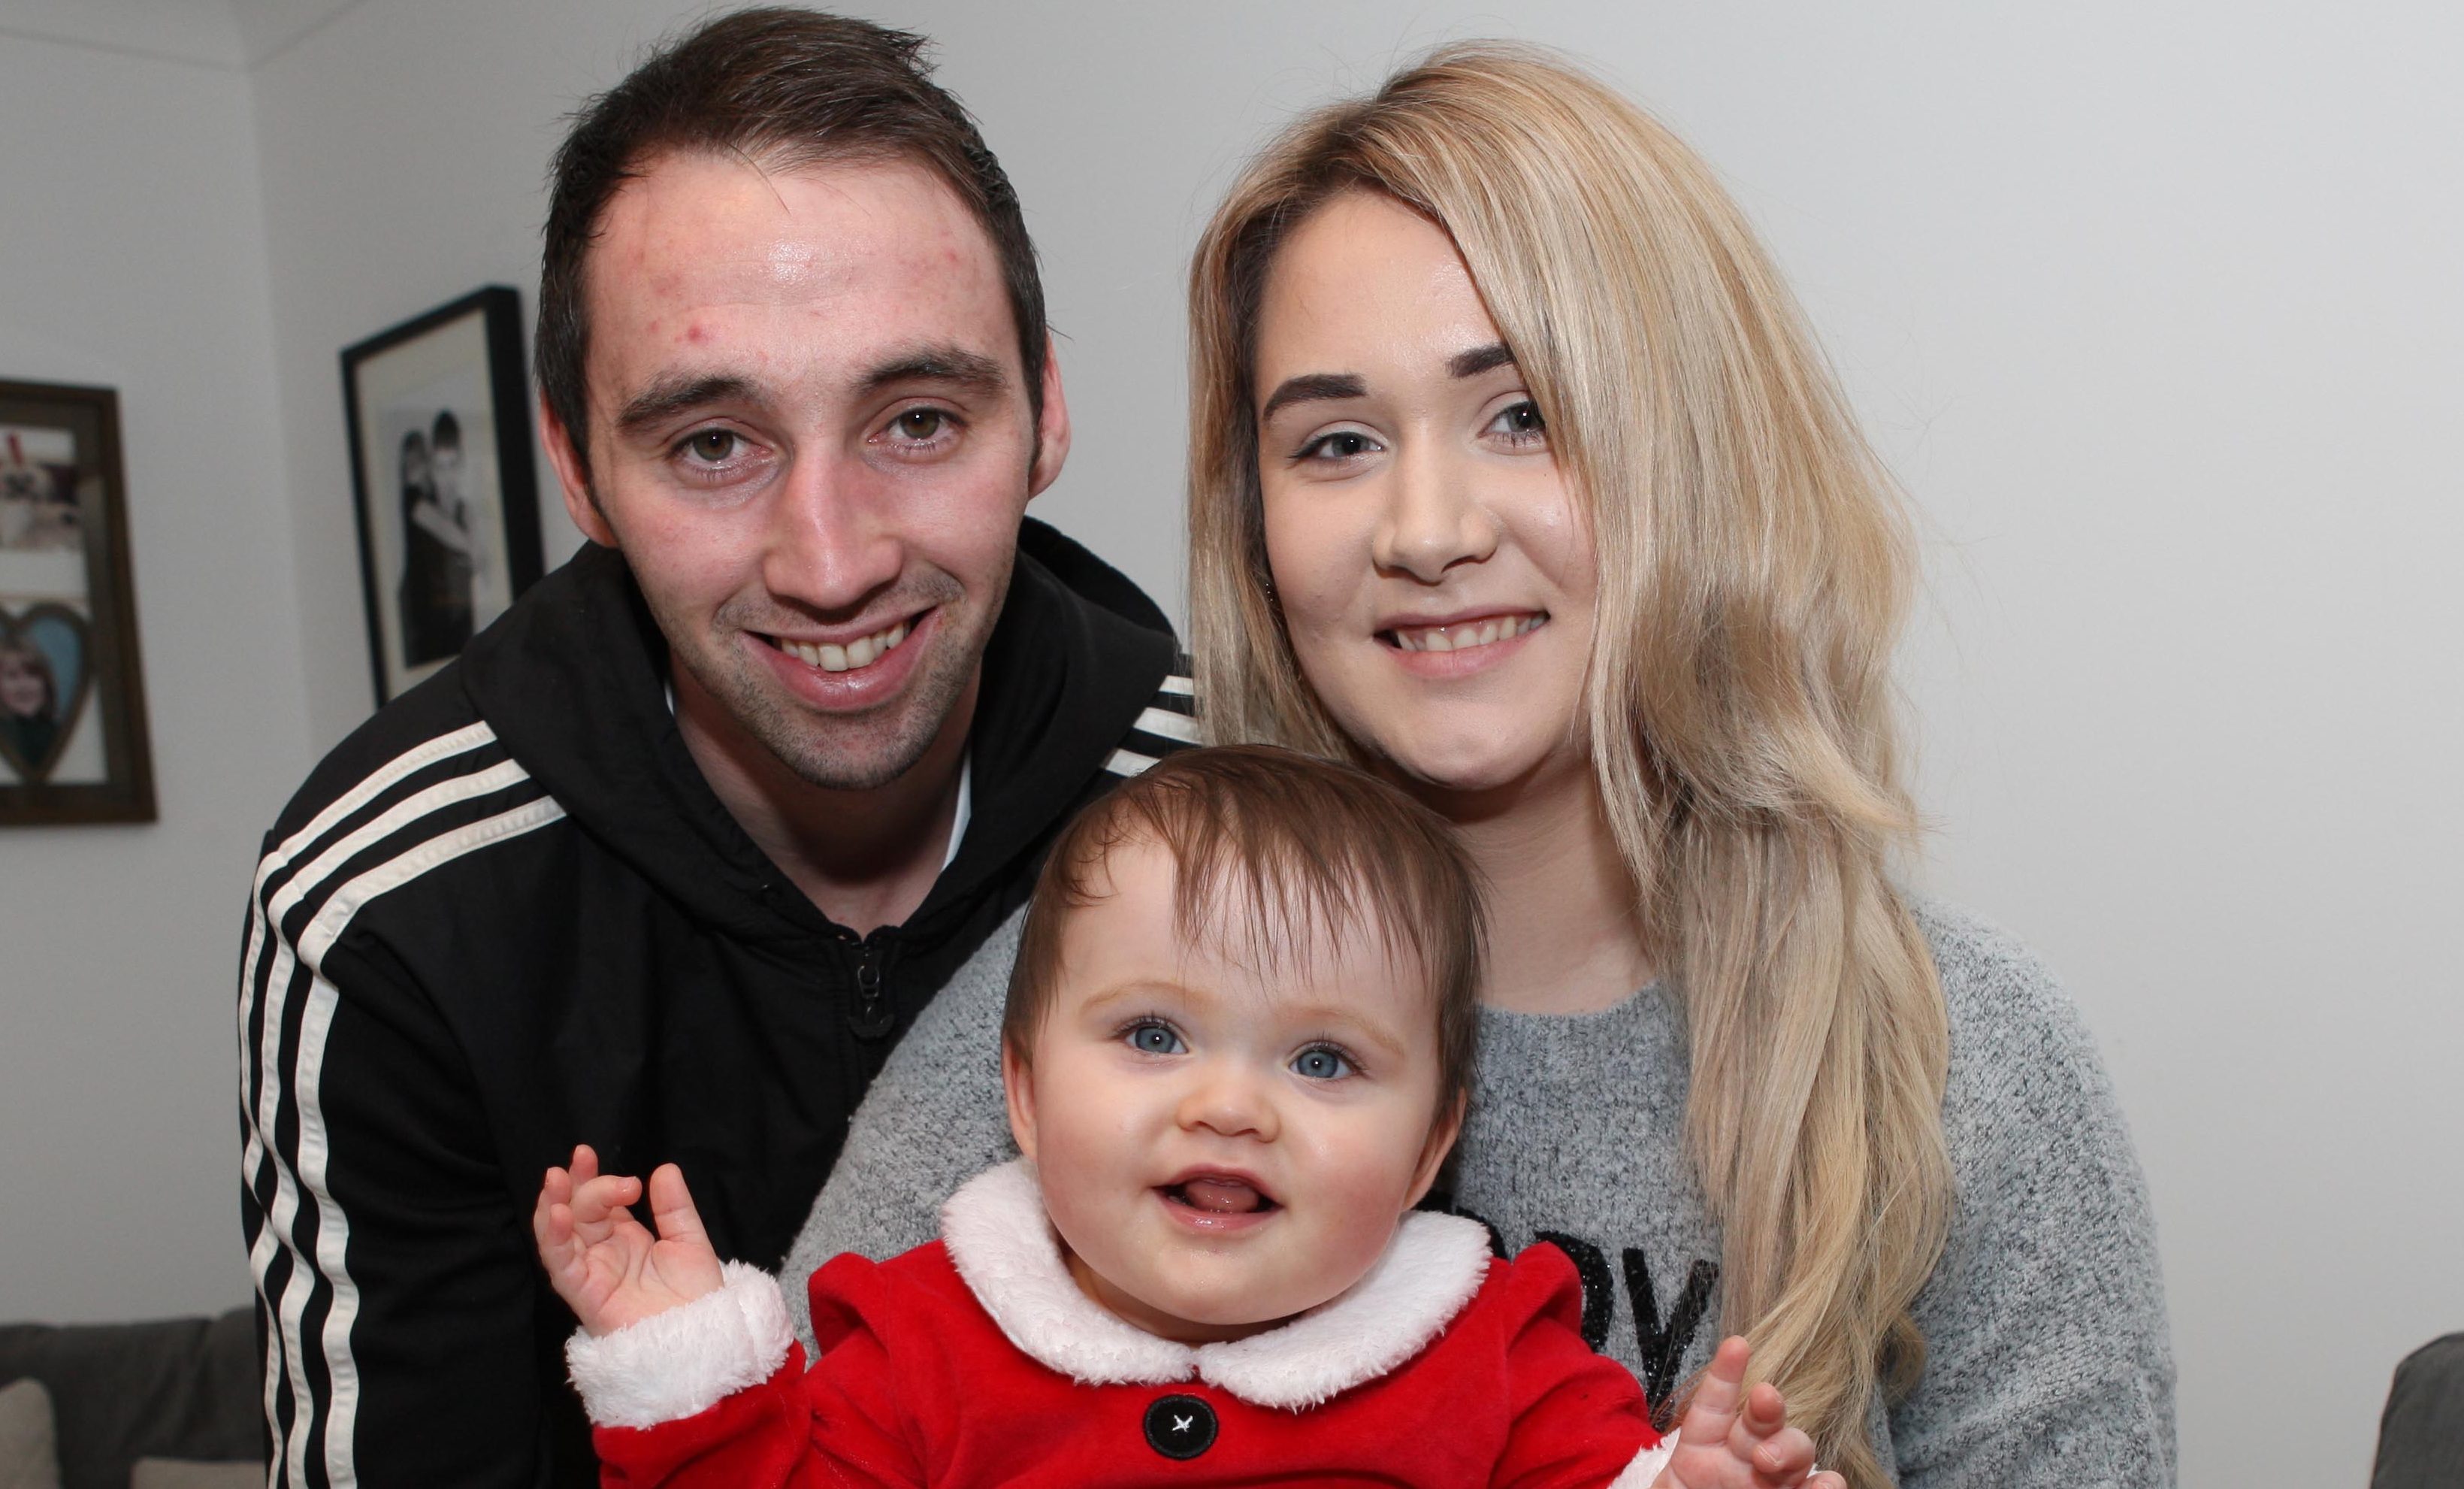 Kayleigh Bisset and Kevin Mackinnon with their daughter Emelia